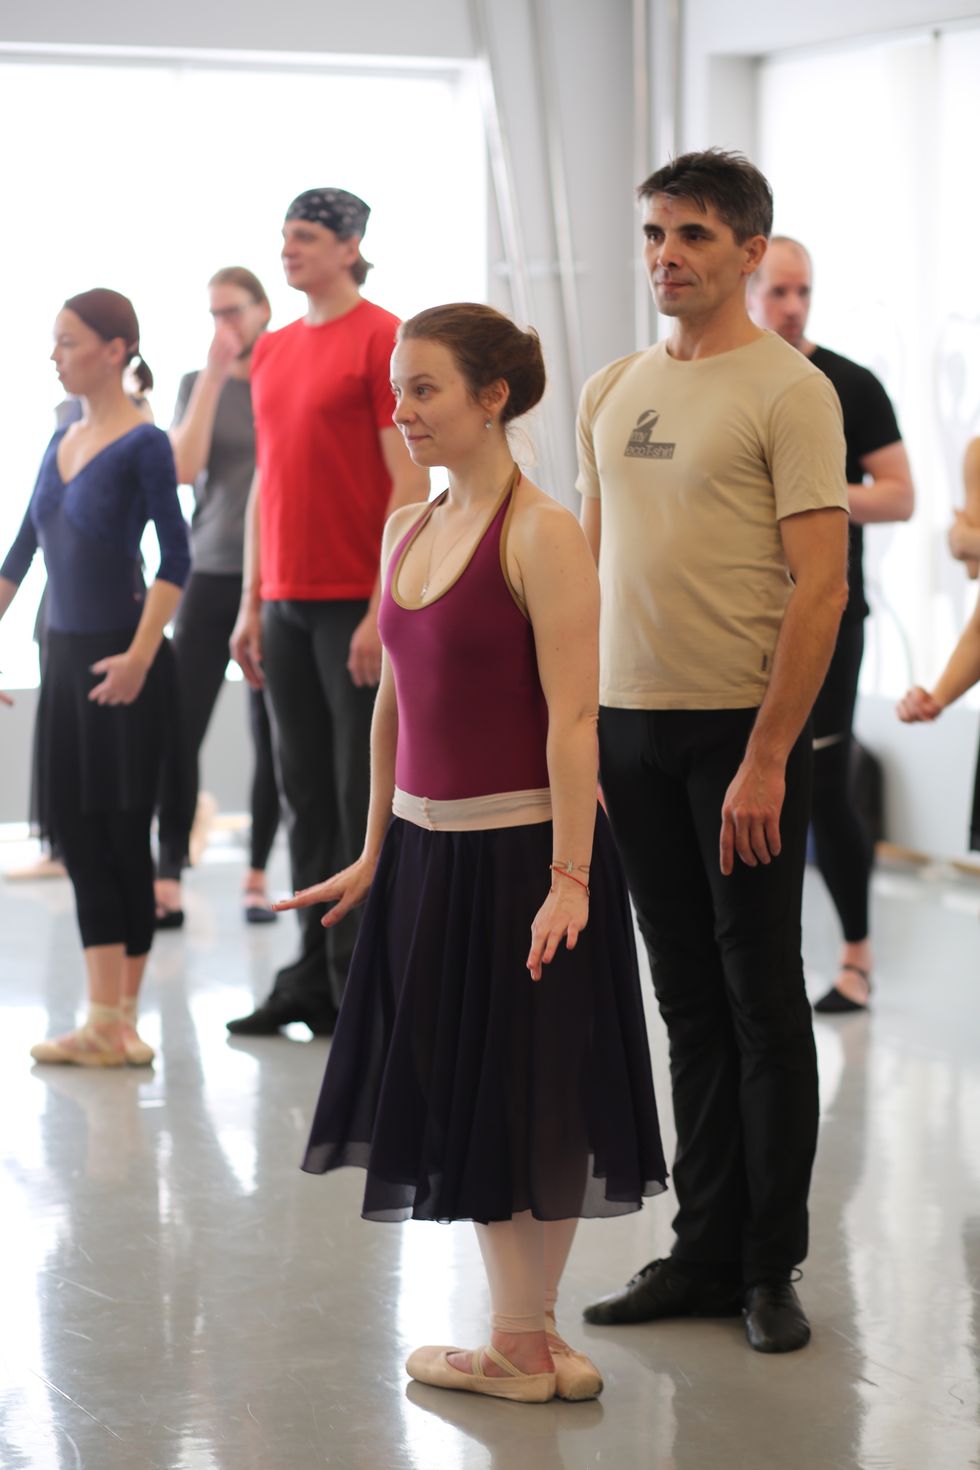 During a pas de deux class, a woman in a burgundy leotard, black skirt and pointe shoes stands in fifth position while her partner, in a beige T-shirt and black pants, stands behind her in a loose first position.